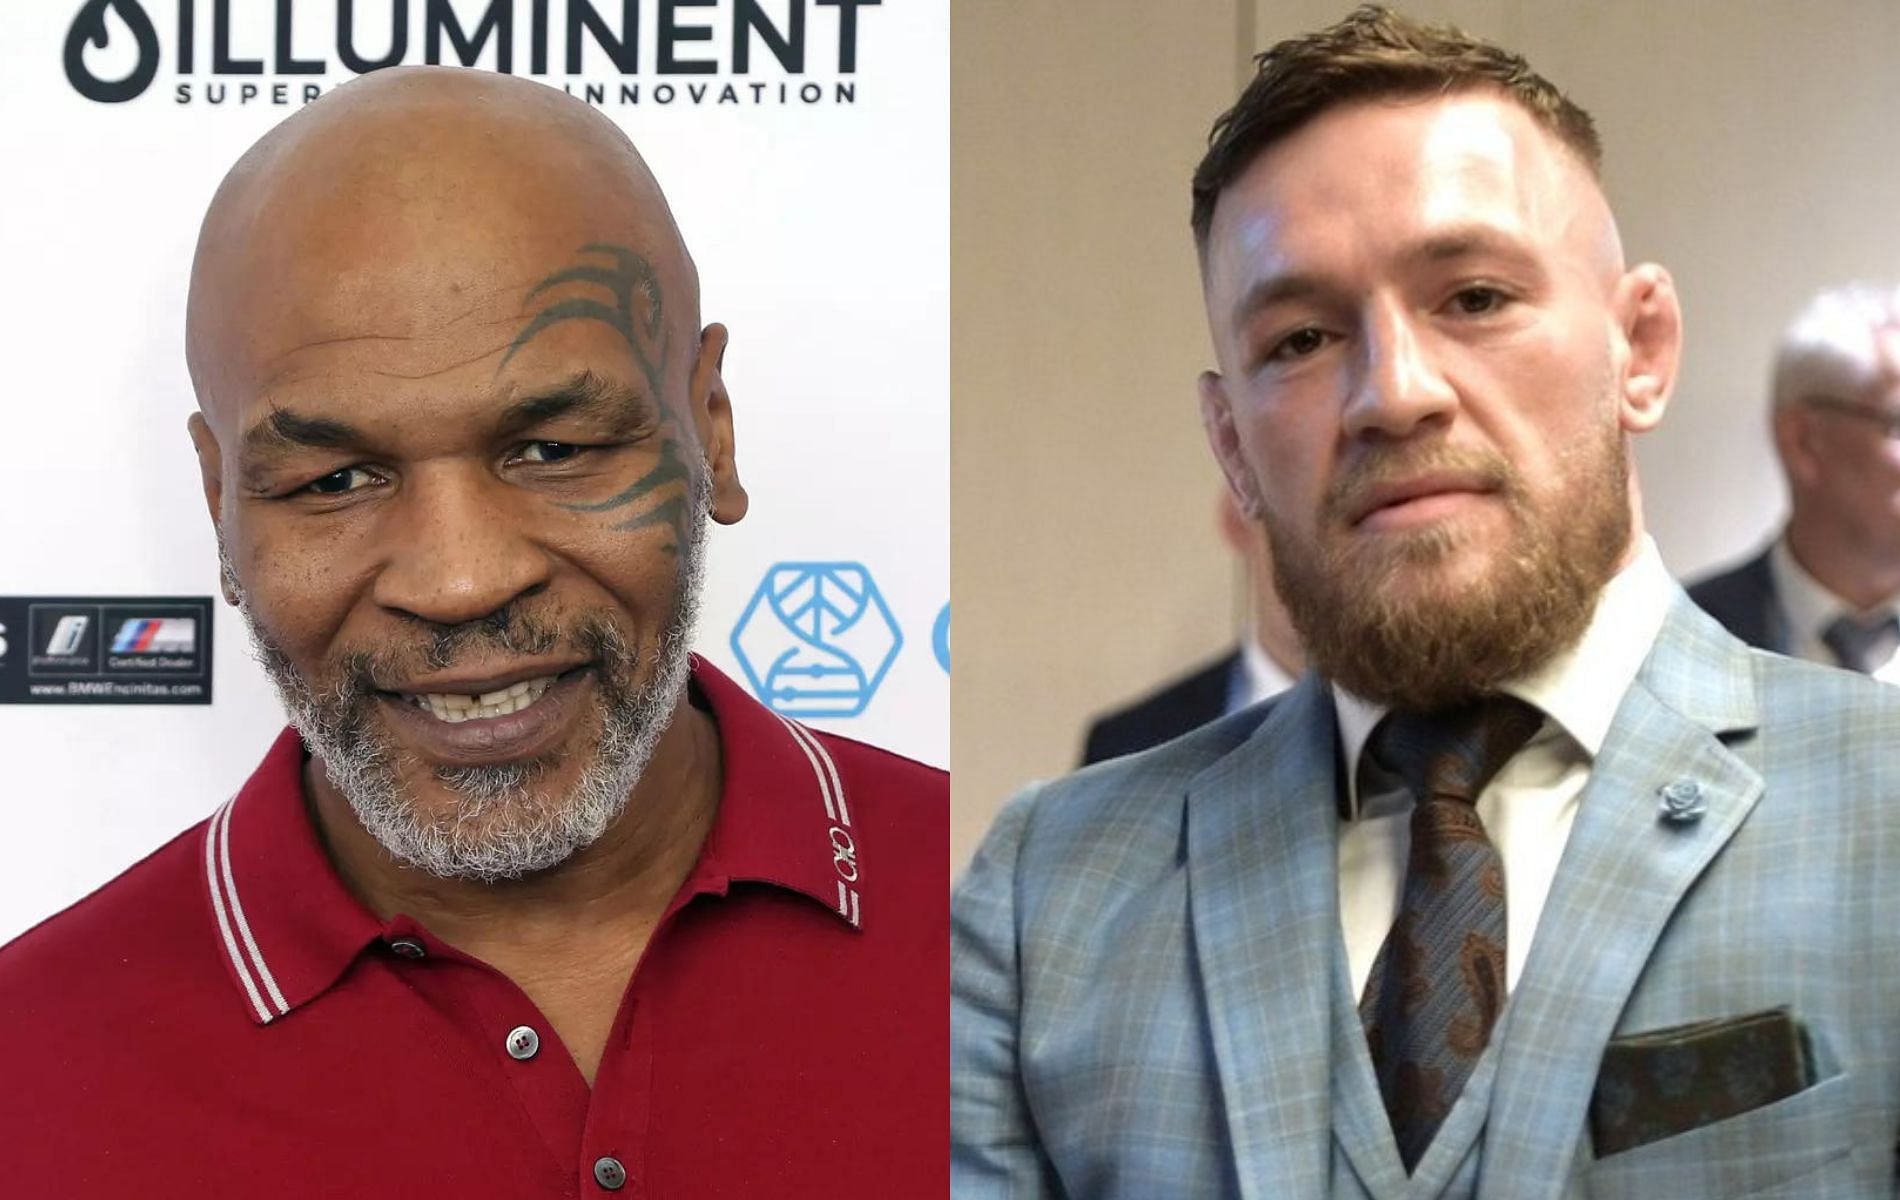 Mike Tyson (left) and Conor McGregor (right)